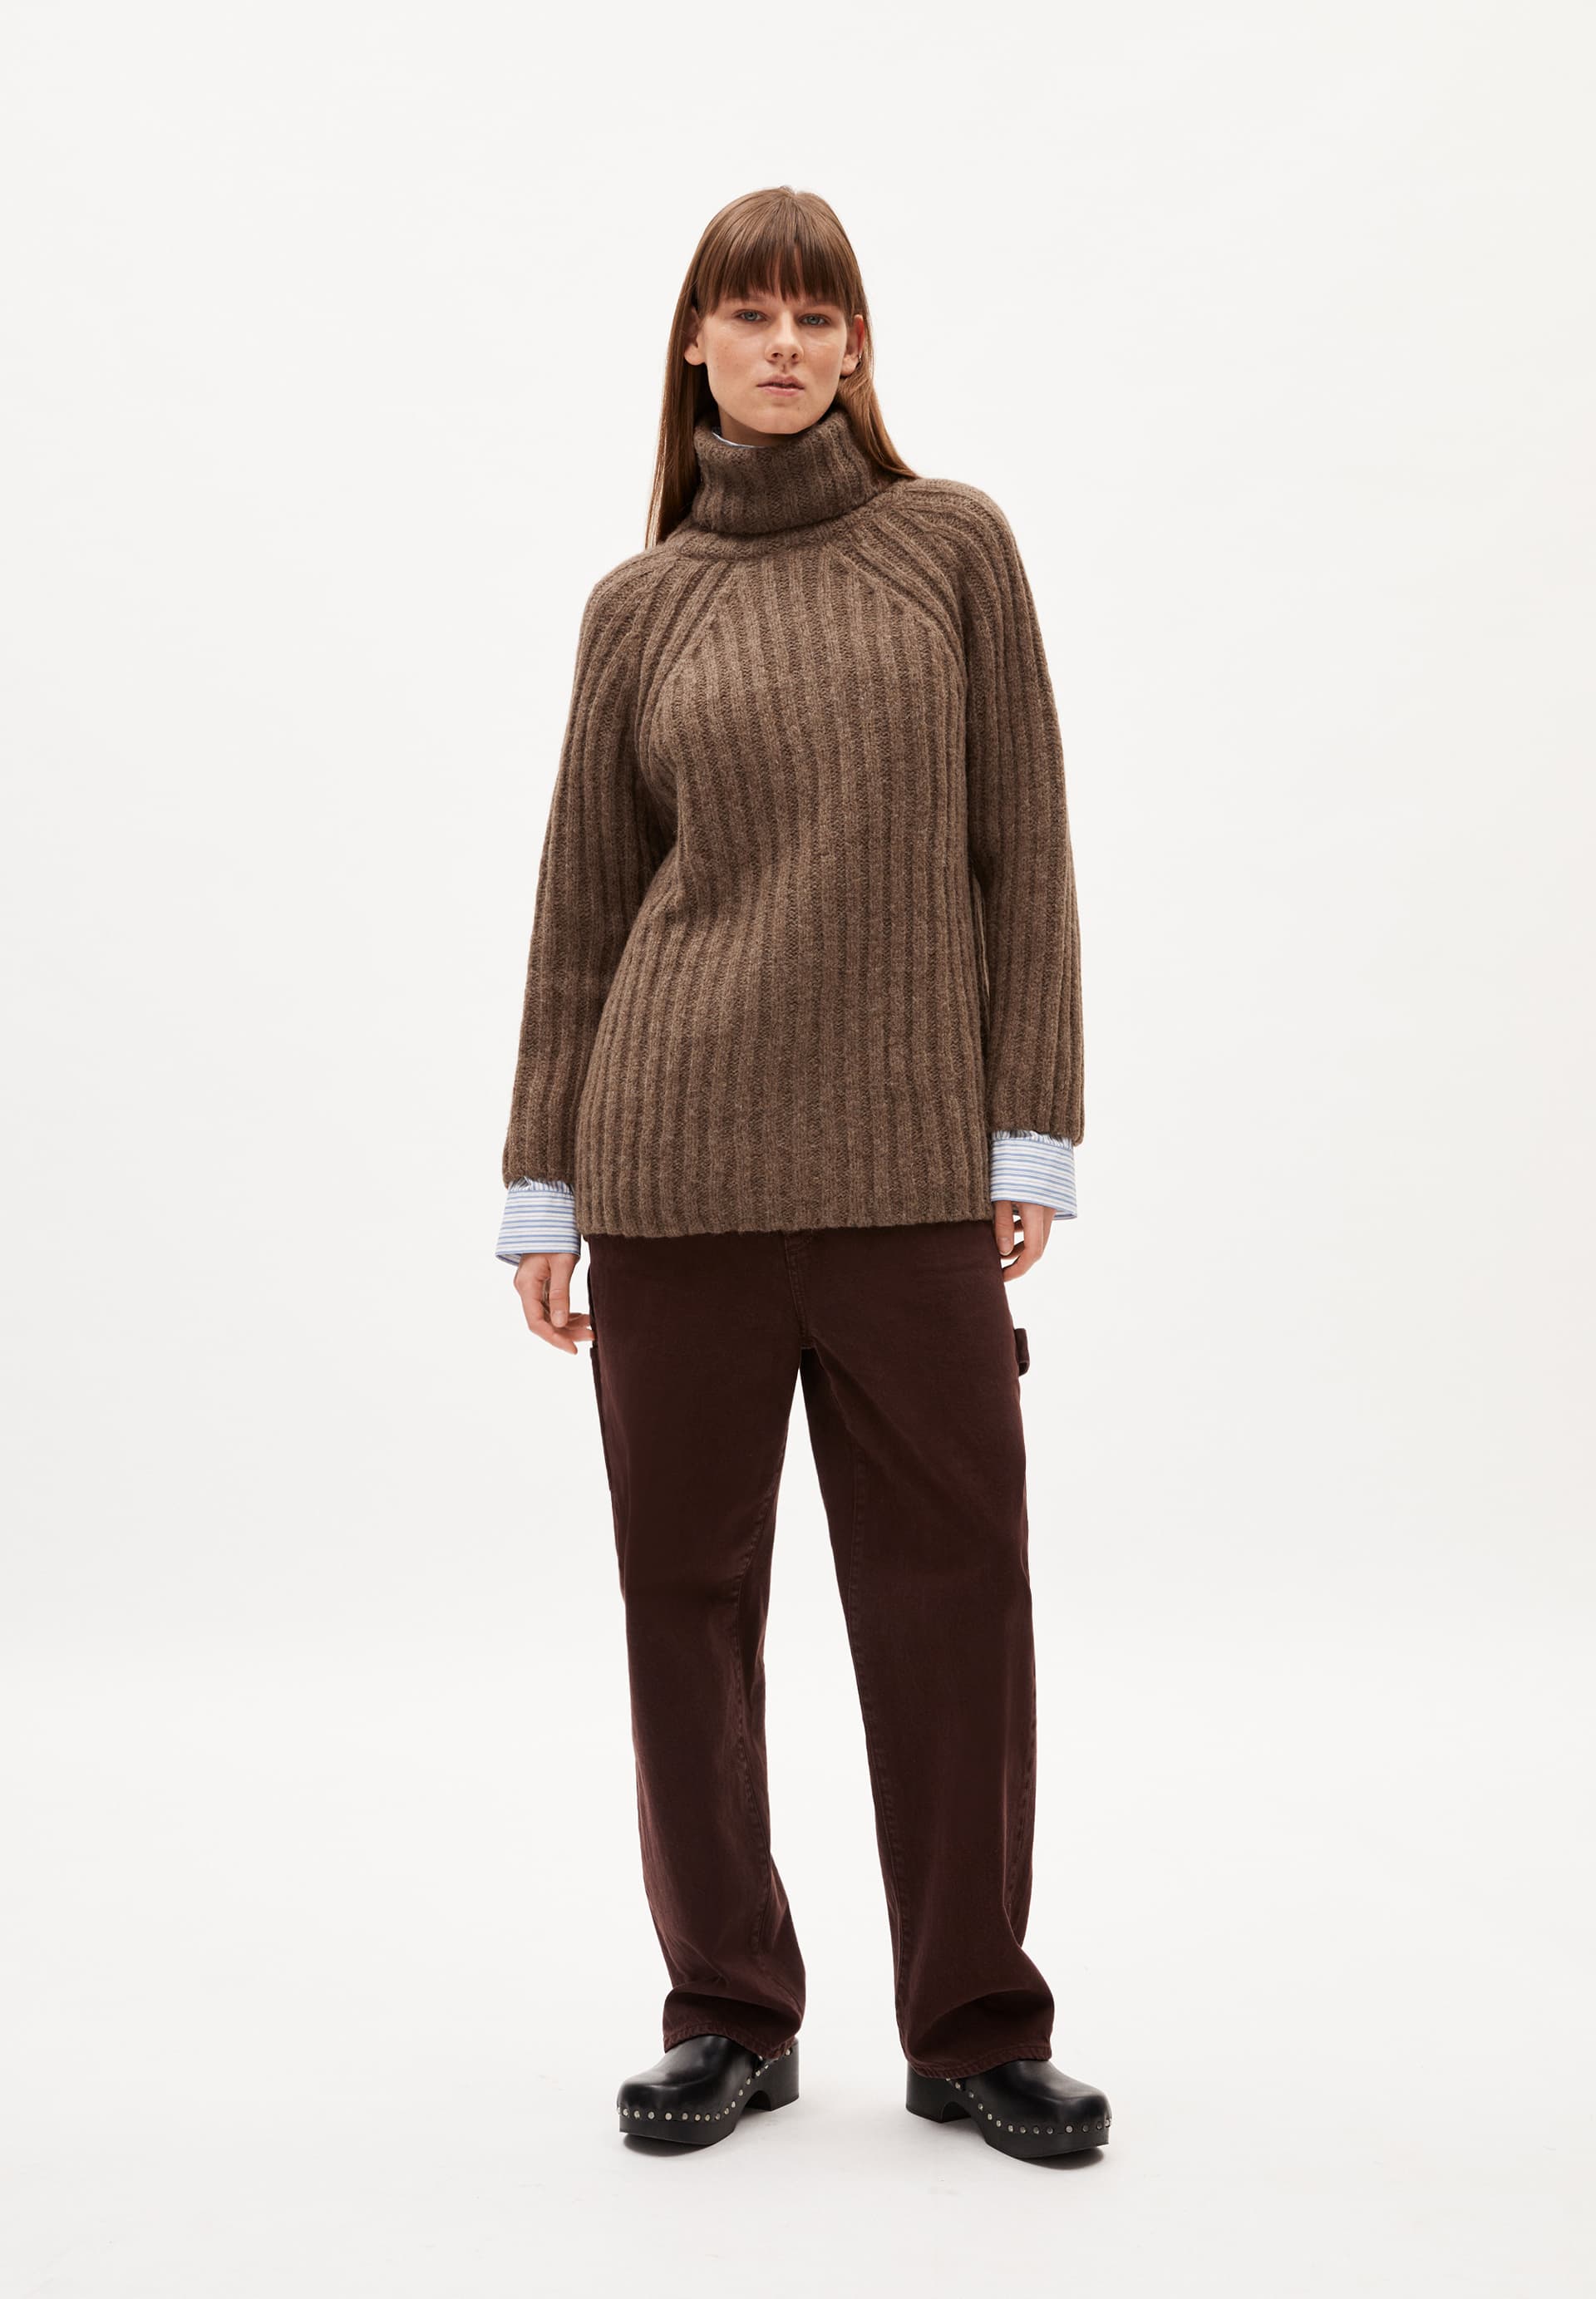 LANESSAA Sweater Loose Fit made of Alpaca Wool Mix